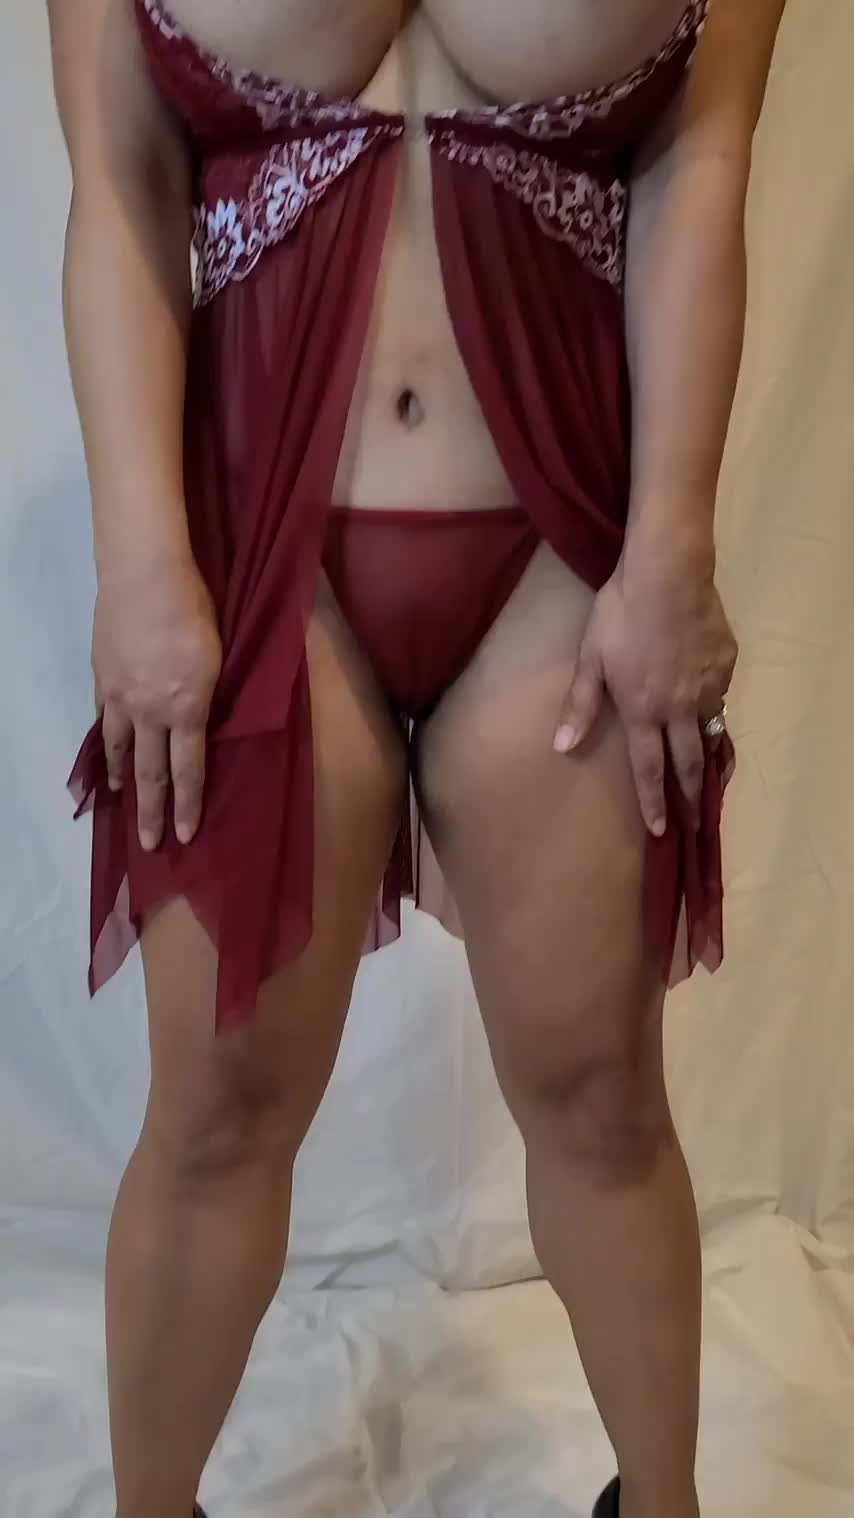 My new lingerie can't even contain them : video clip